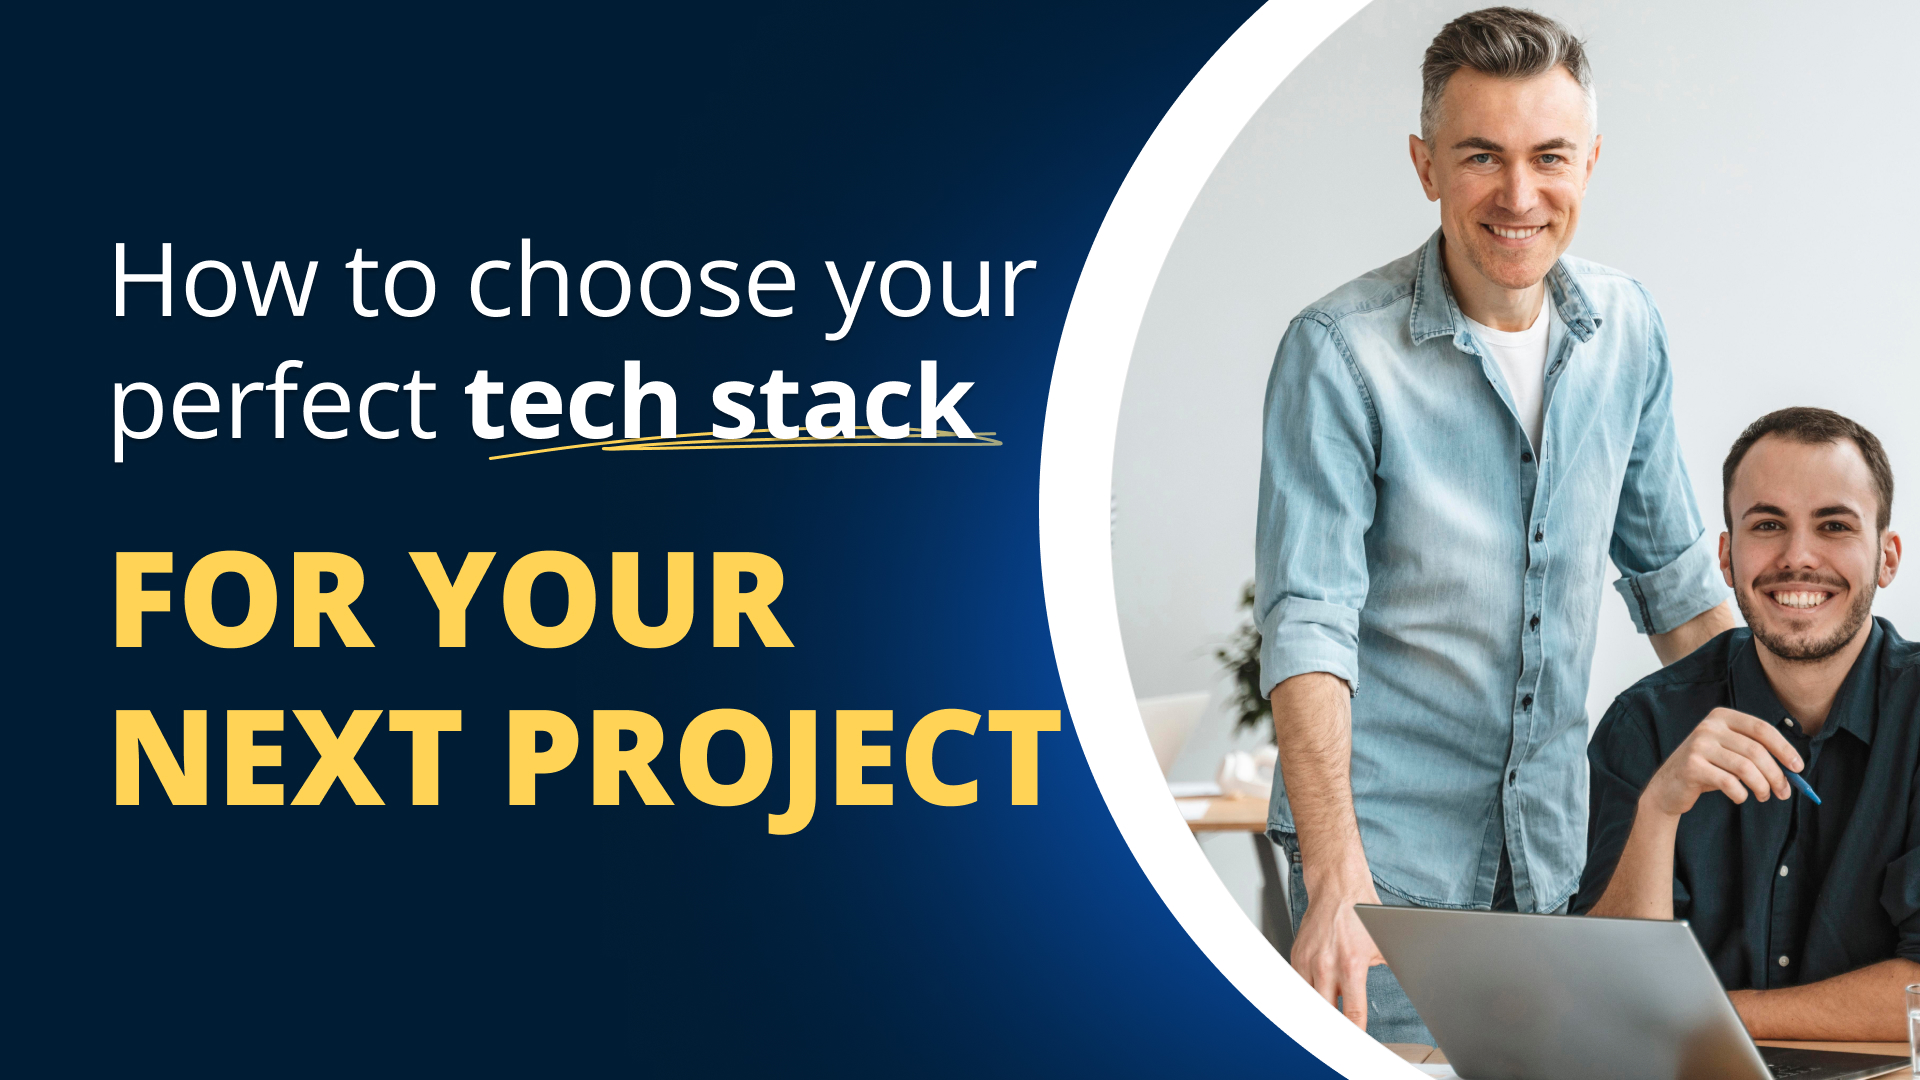 How to choose your perfect tech stack for your next project